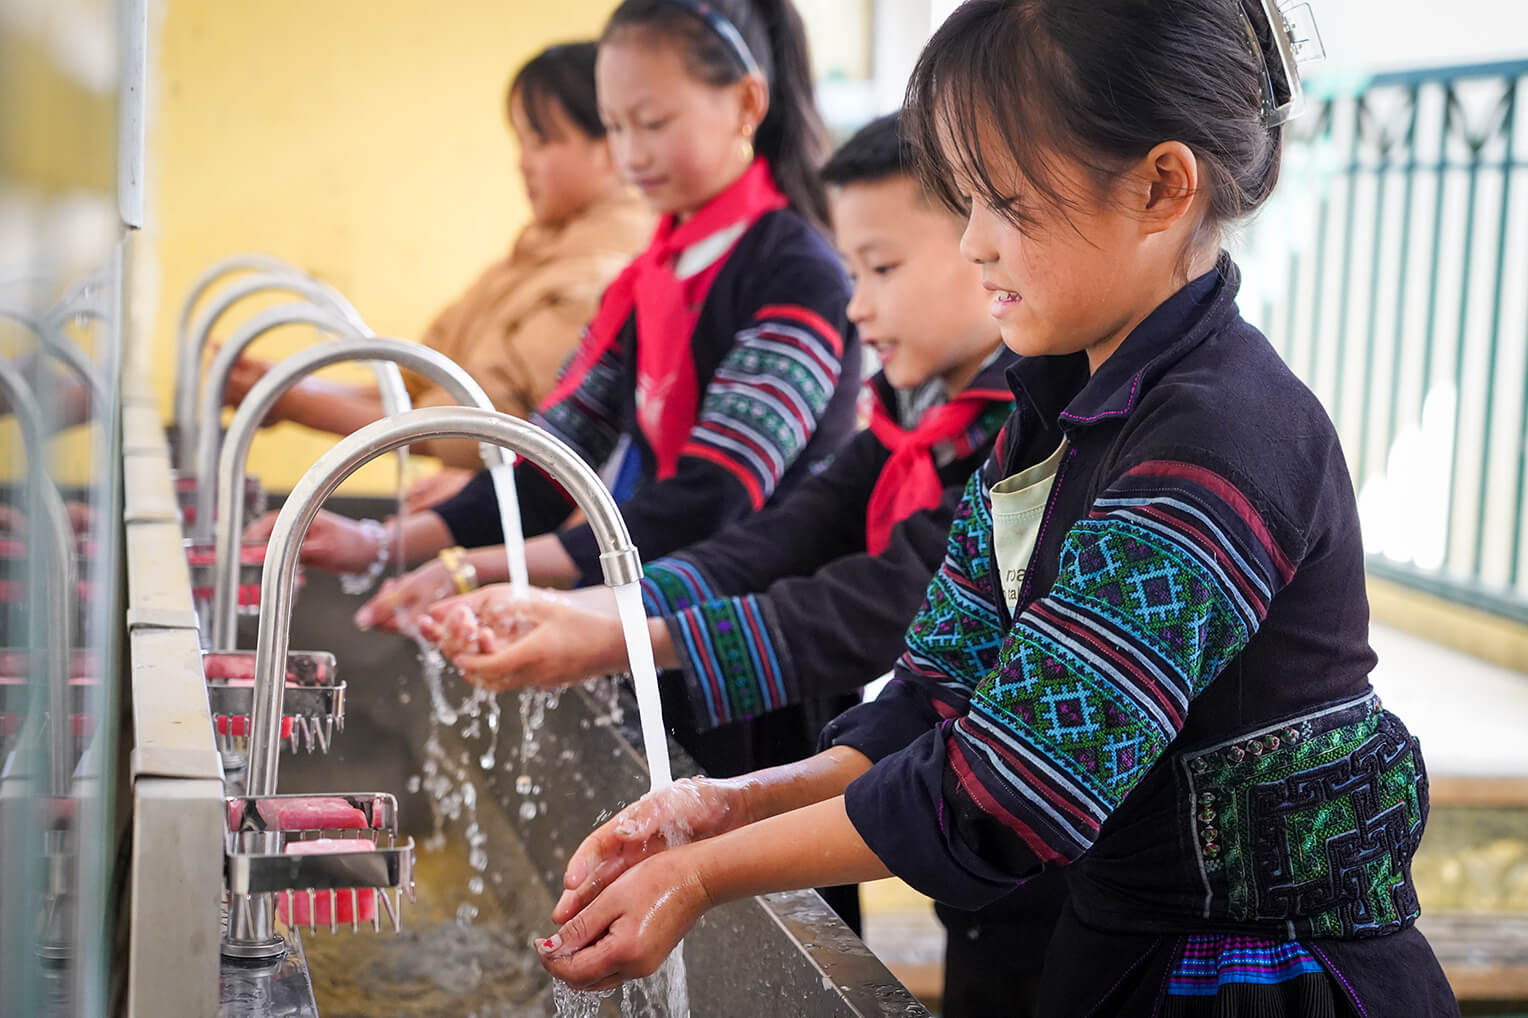 Water taps installed by Samaritan's Purse give students a way to wash their hands and, in turn, prevent the spread of illnesses.